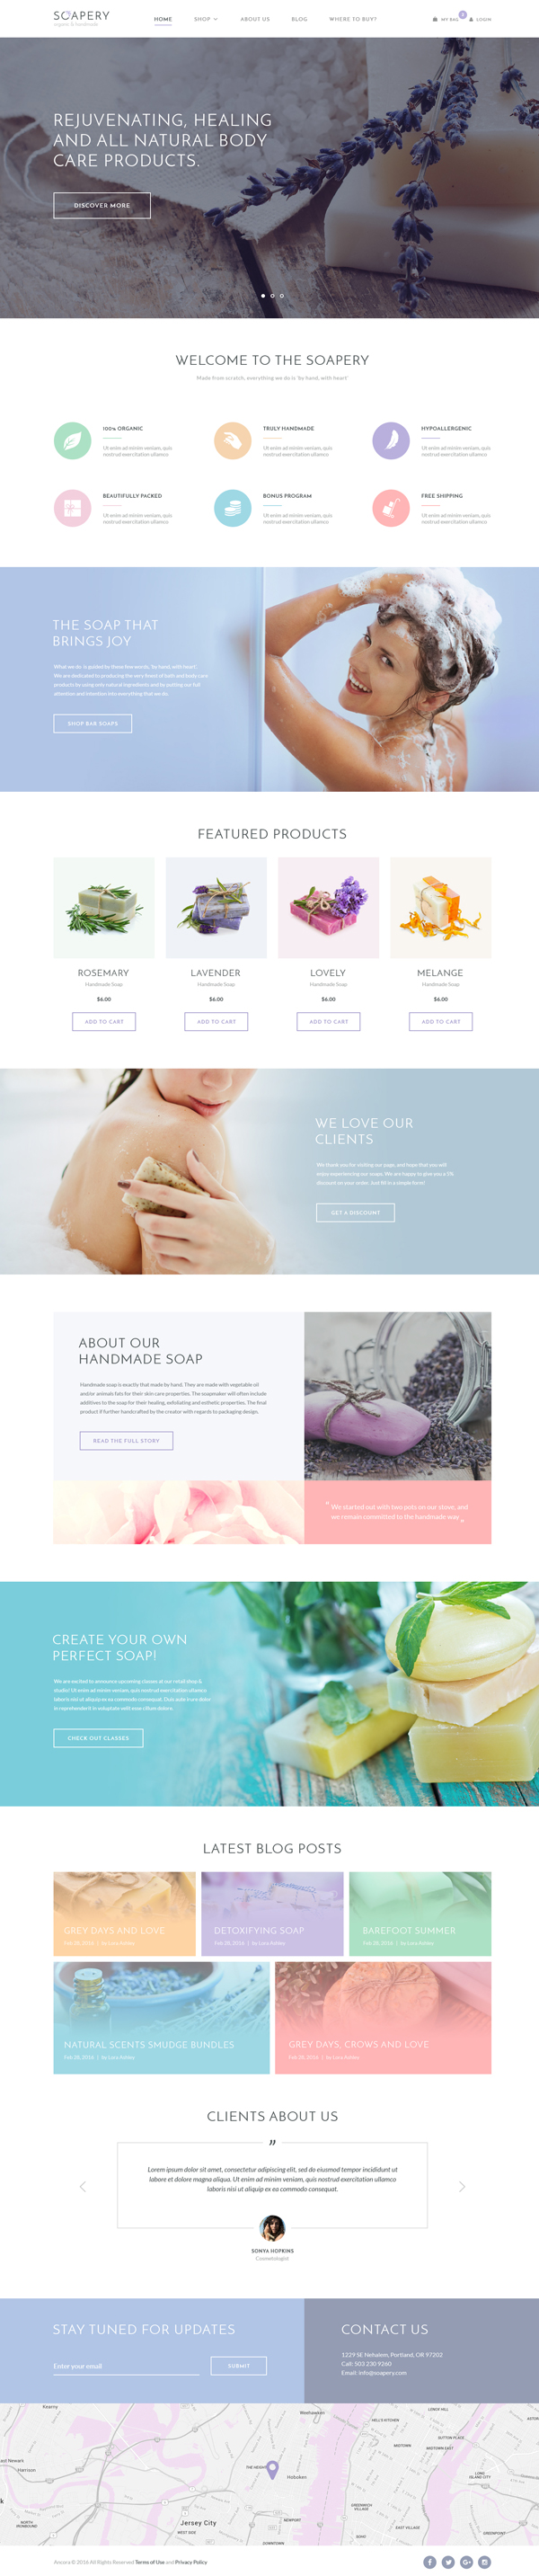 Soapery - Handmade Soap & Handcrafted Products Shop WP Theme